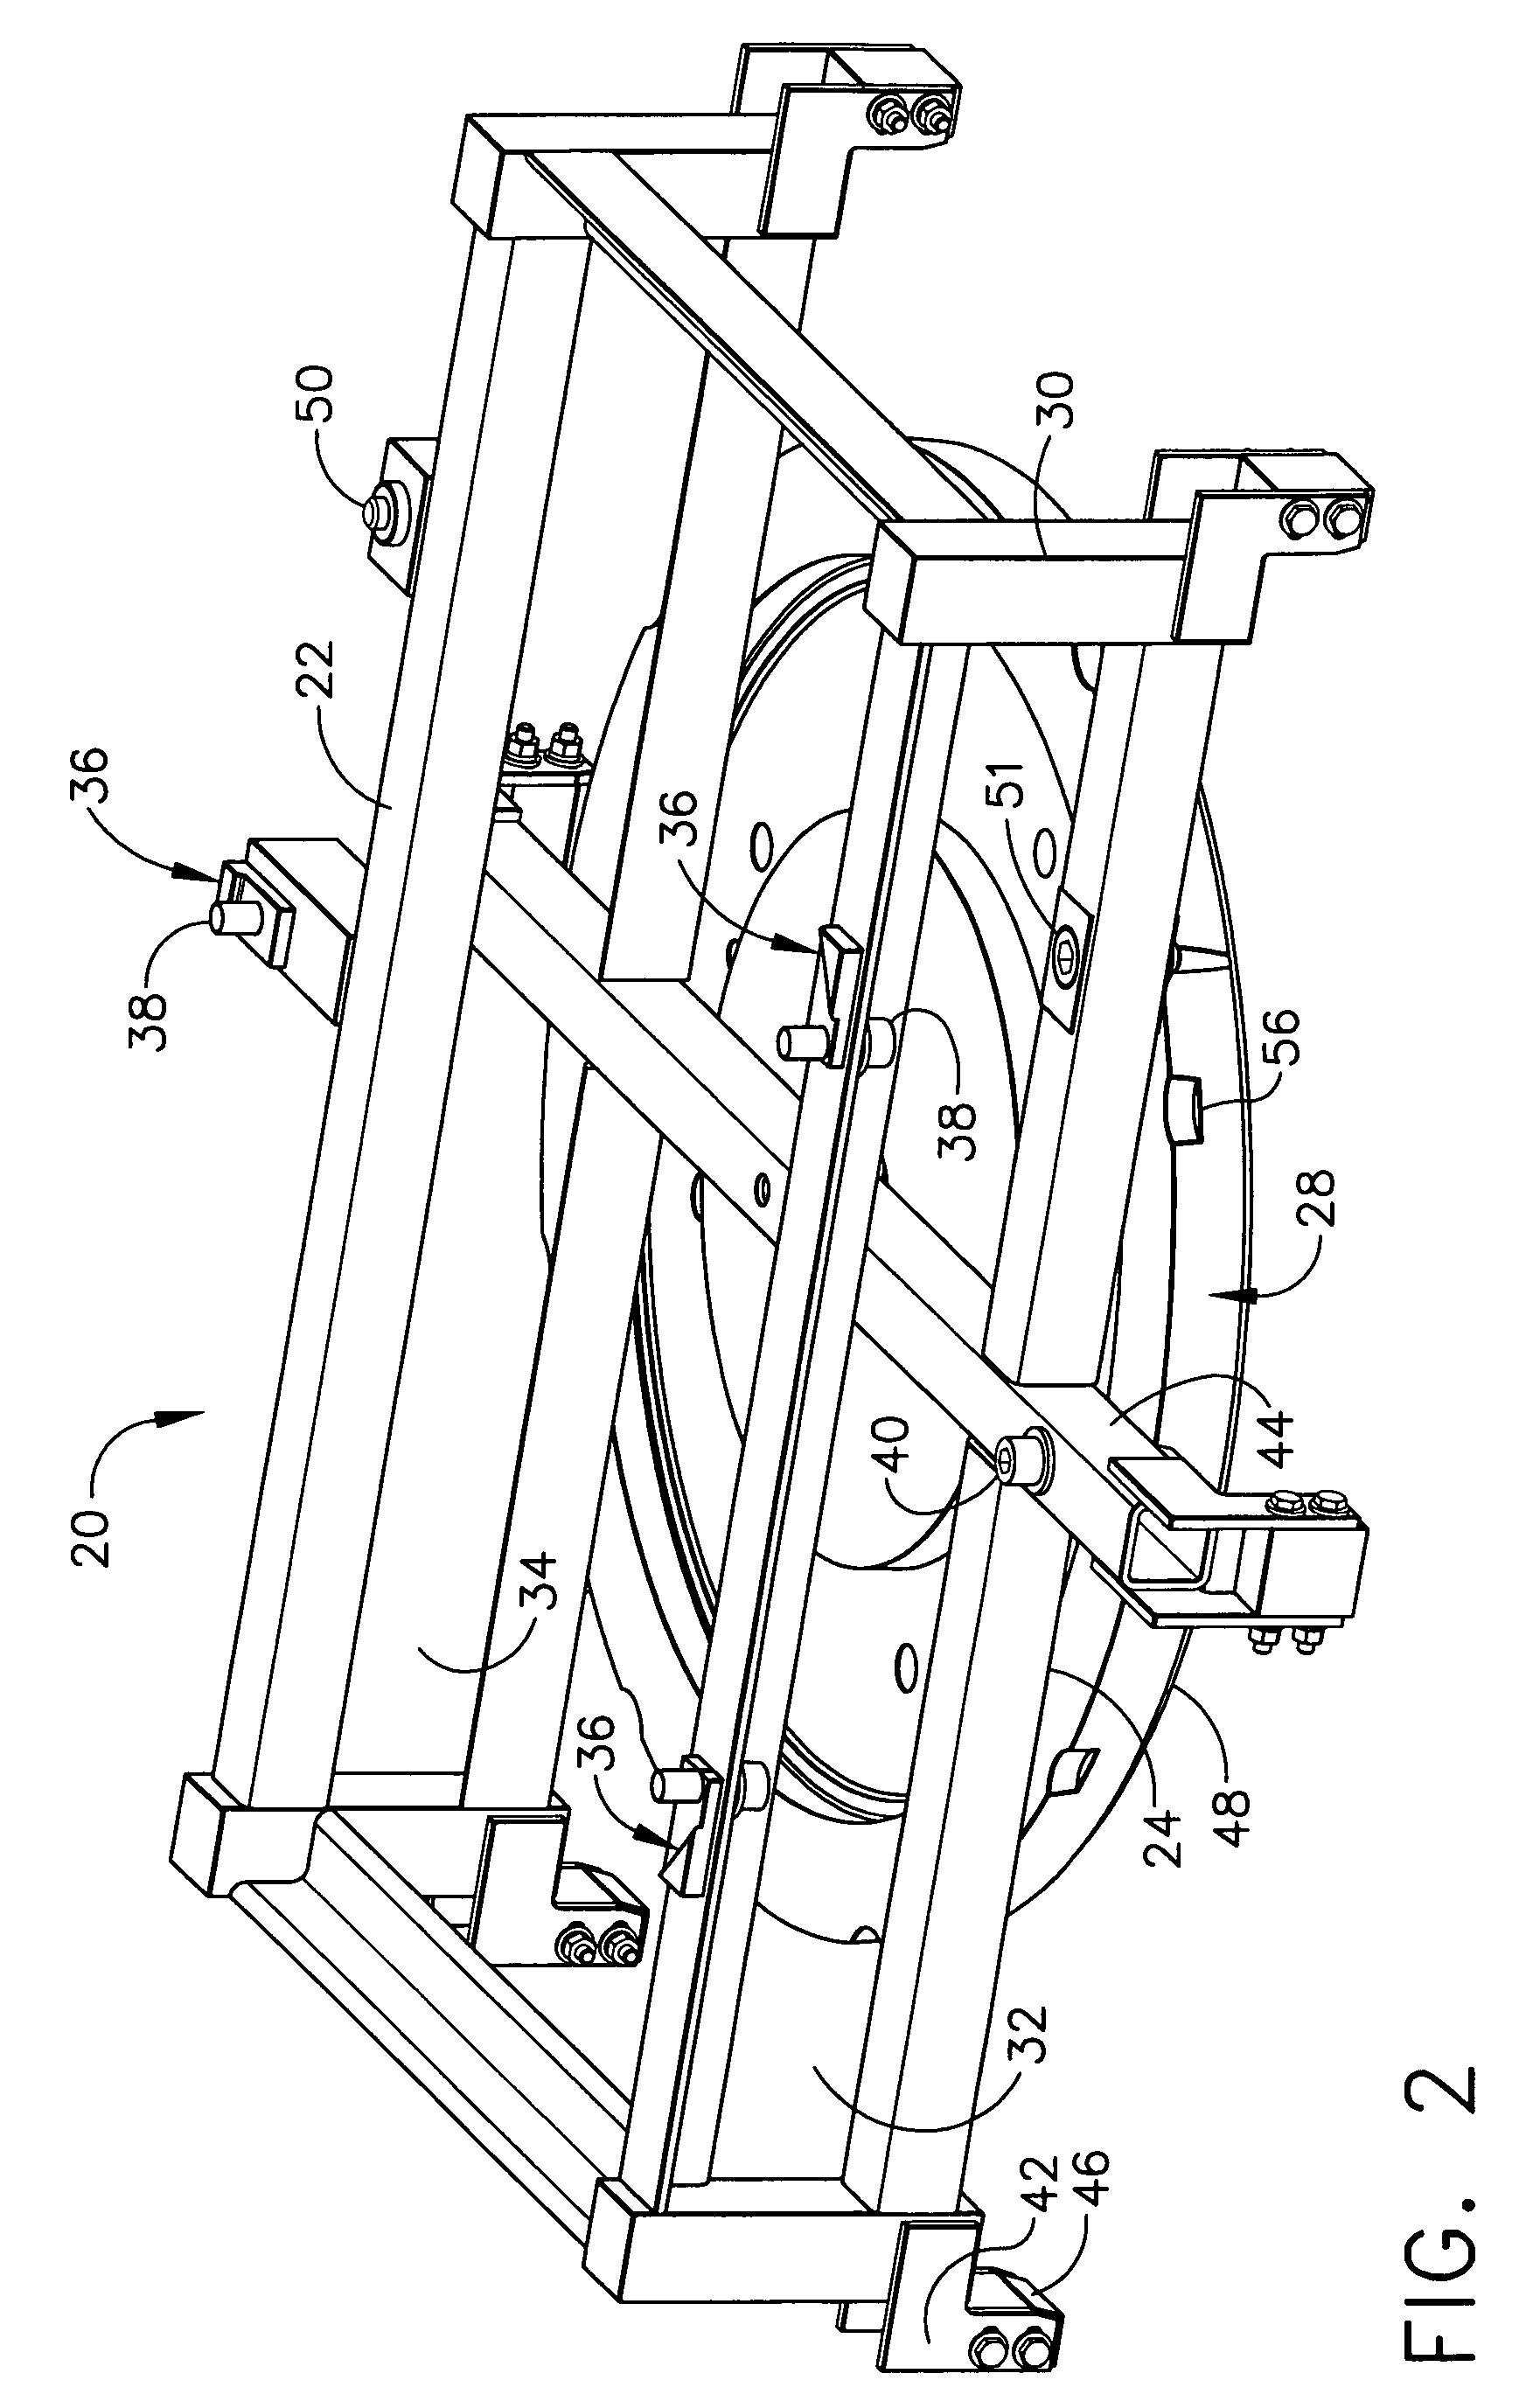 Method of extracting and inserting upper and lower molds